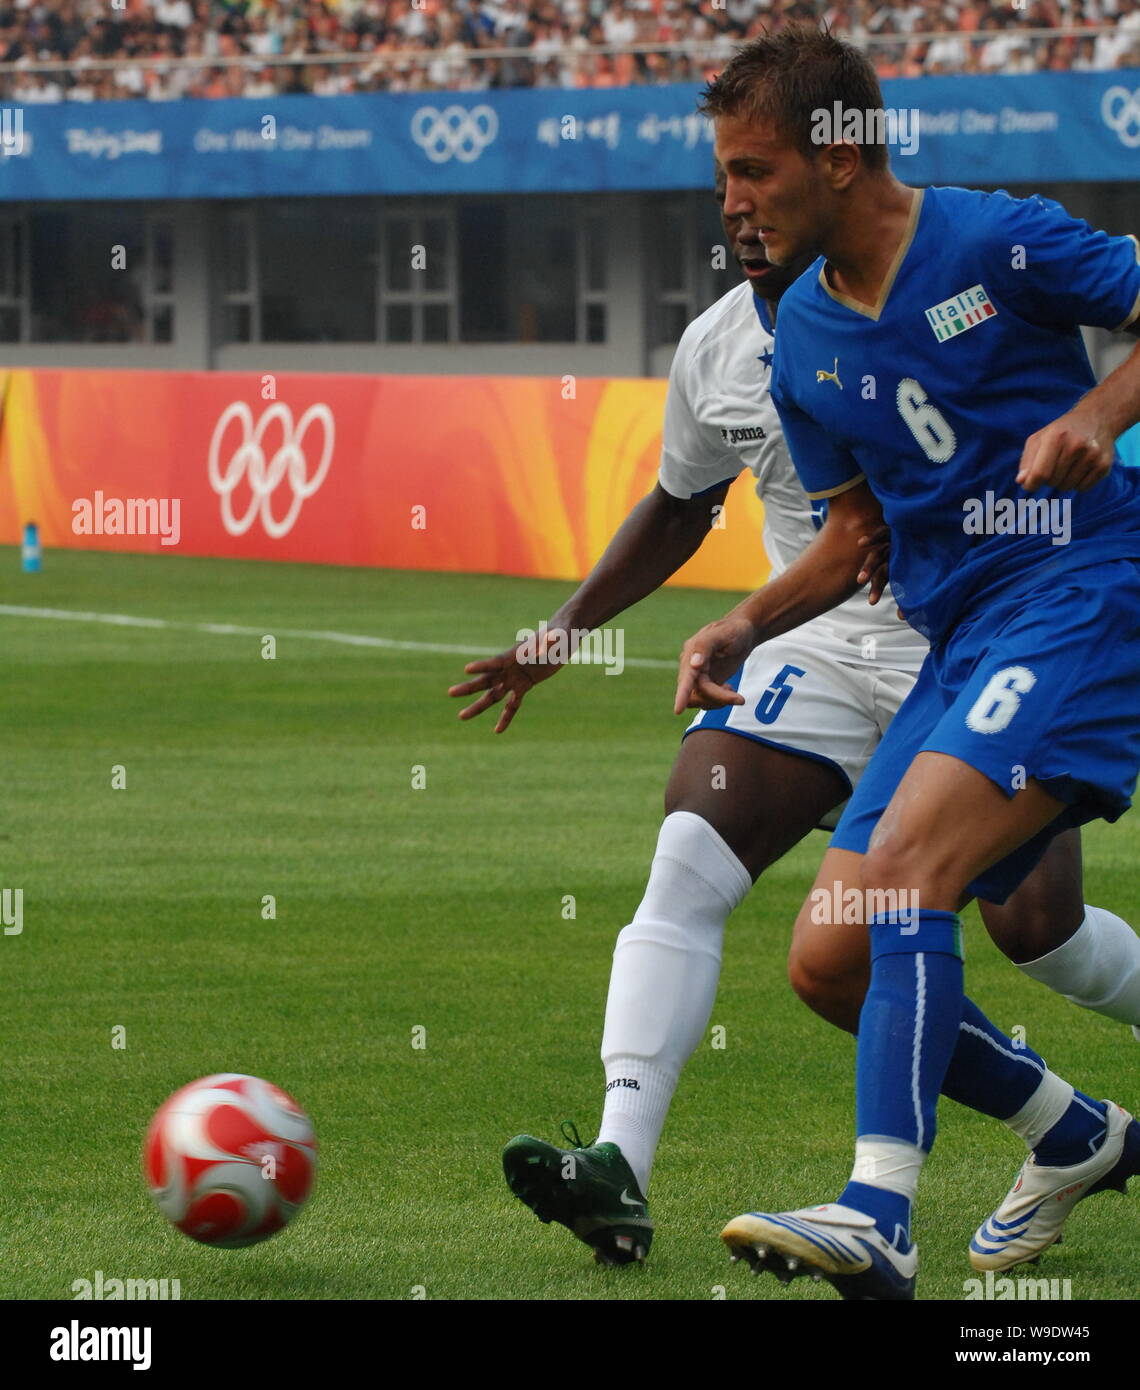 Domenico CRISCITO (R) of Italy competes with Erick NORALES of Honduras at a Group D soccer match of the Olympic Mens Soccer preliminary at the Qinhuan Stock Photo